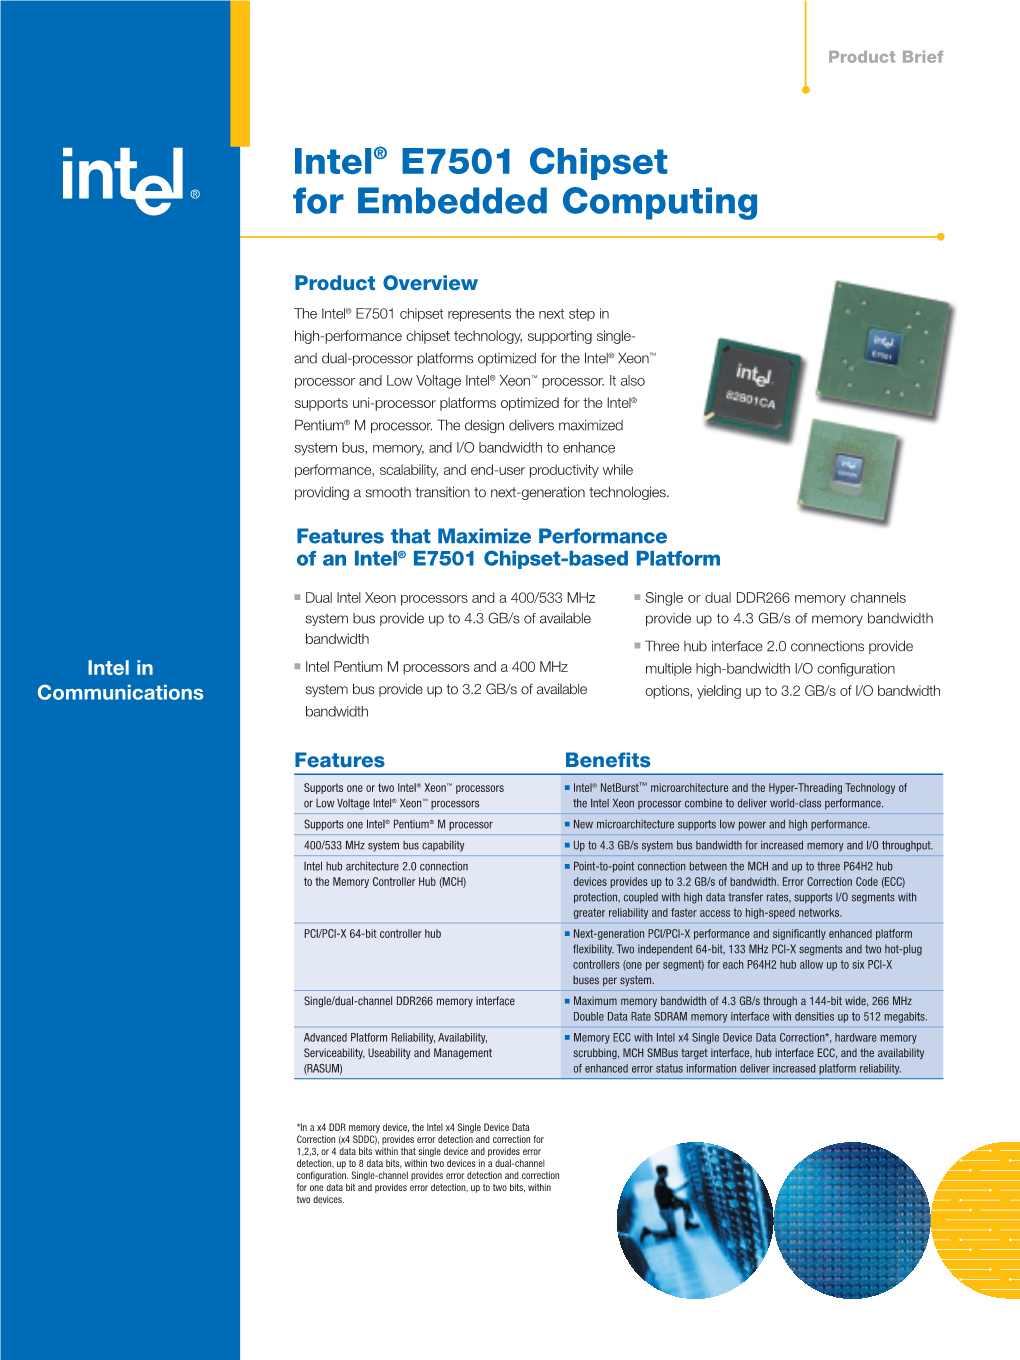 Intel® E7501 Chipset for Embedded Computing